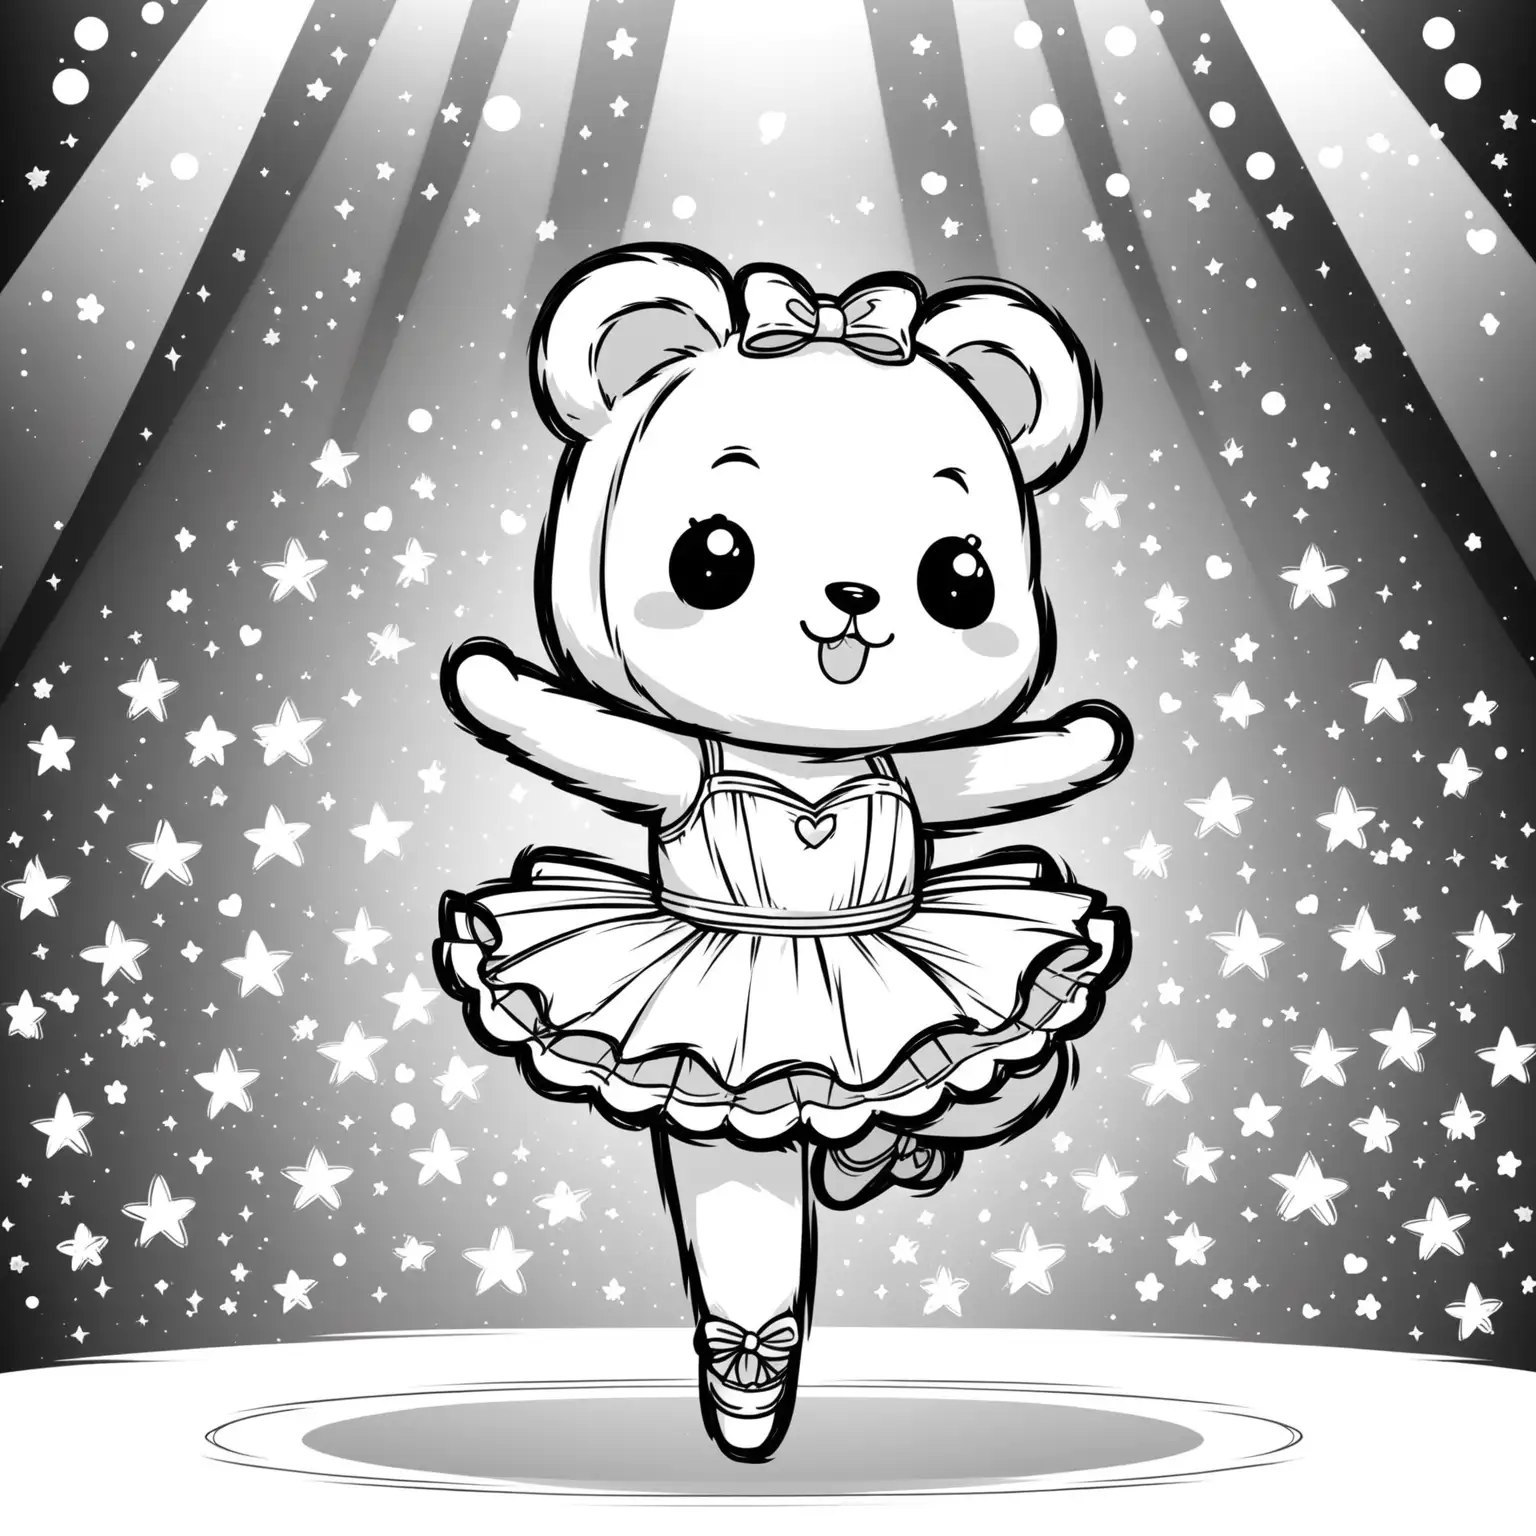 Cute Ballerina Bear Playful Black and White Coloring Page